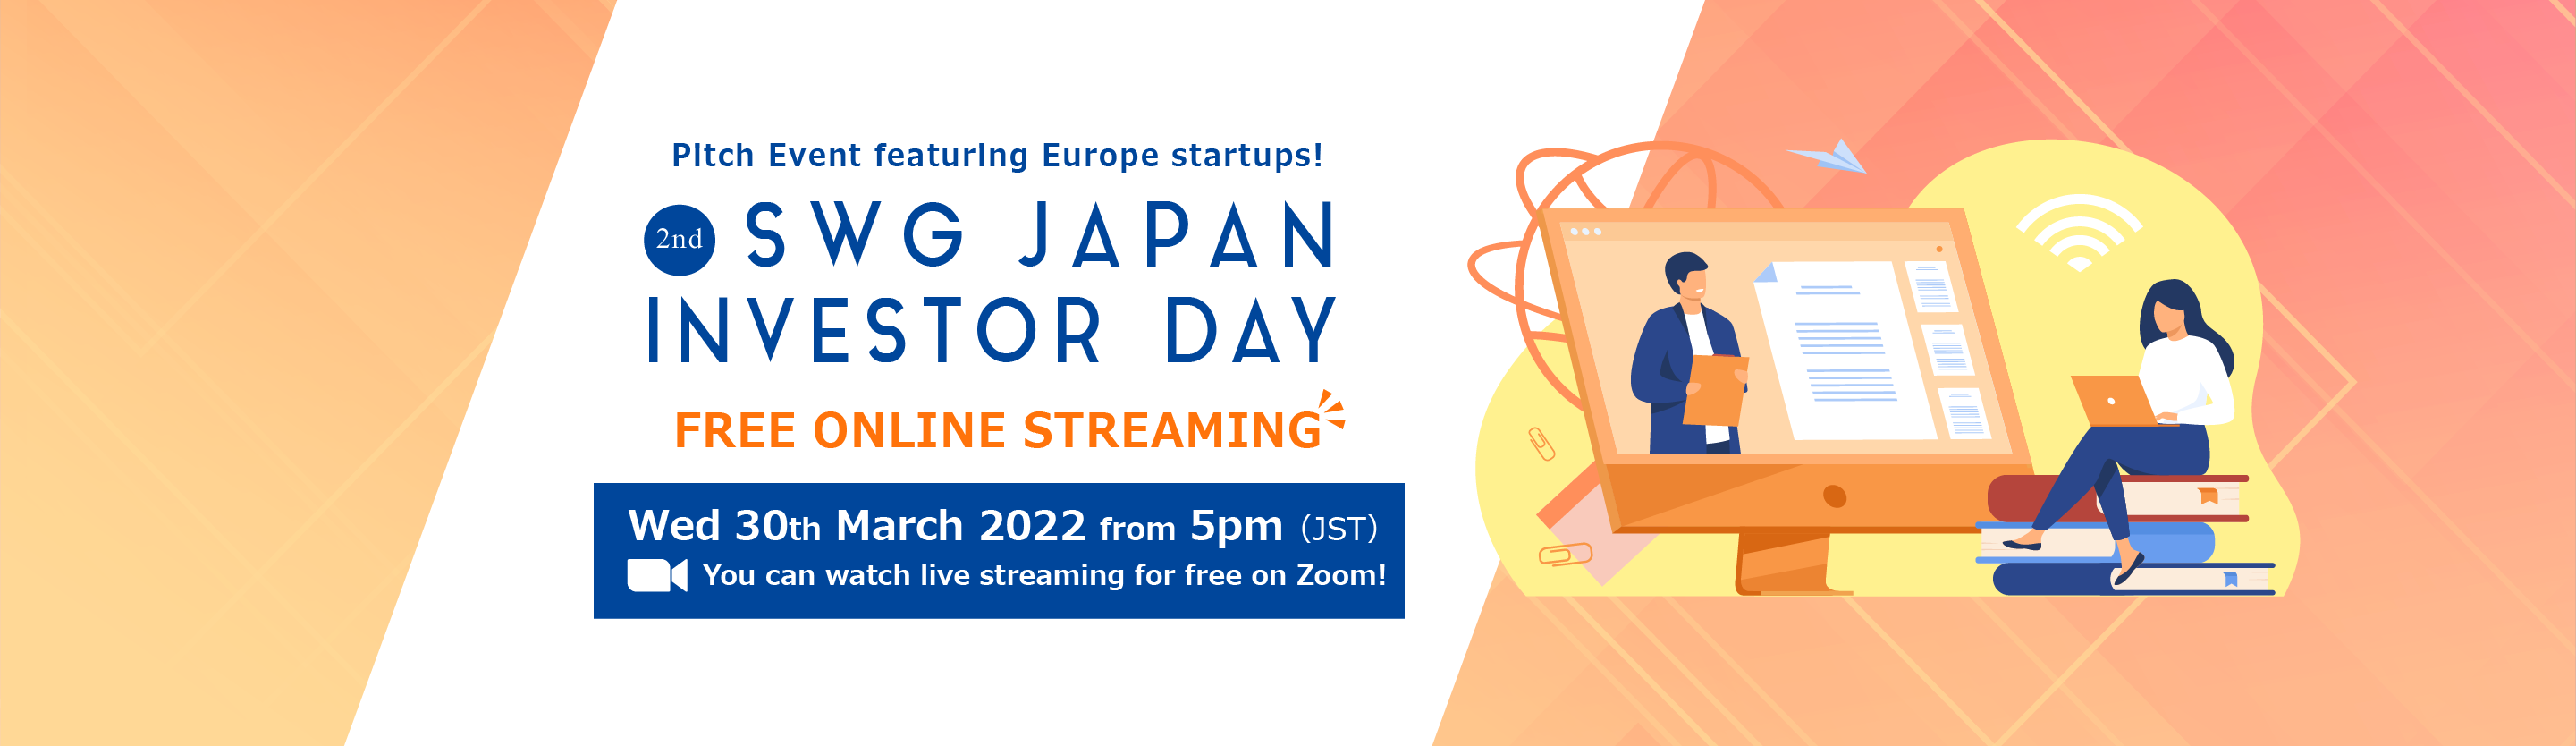 Startup Wise Guys Alesco Ventures For anyone interested in startup investments or business alliances with European companies! Pitch Event featuring European startups Live streaming of SWG Japan Investor Day